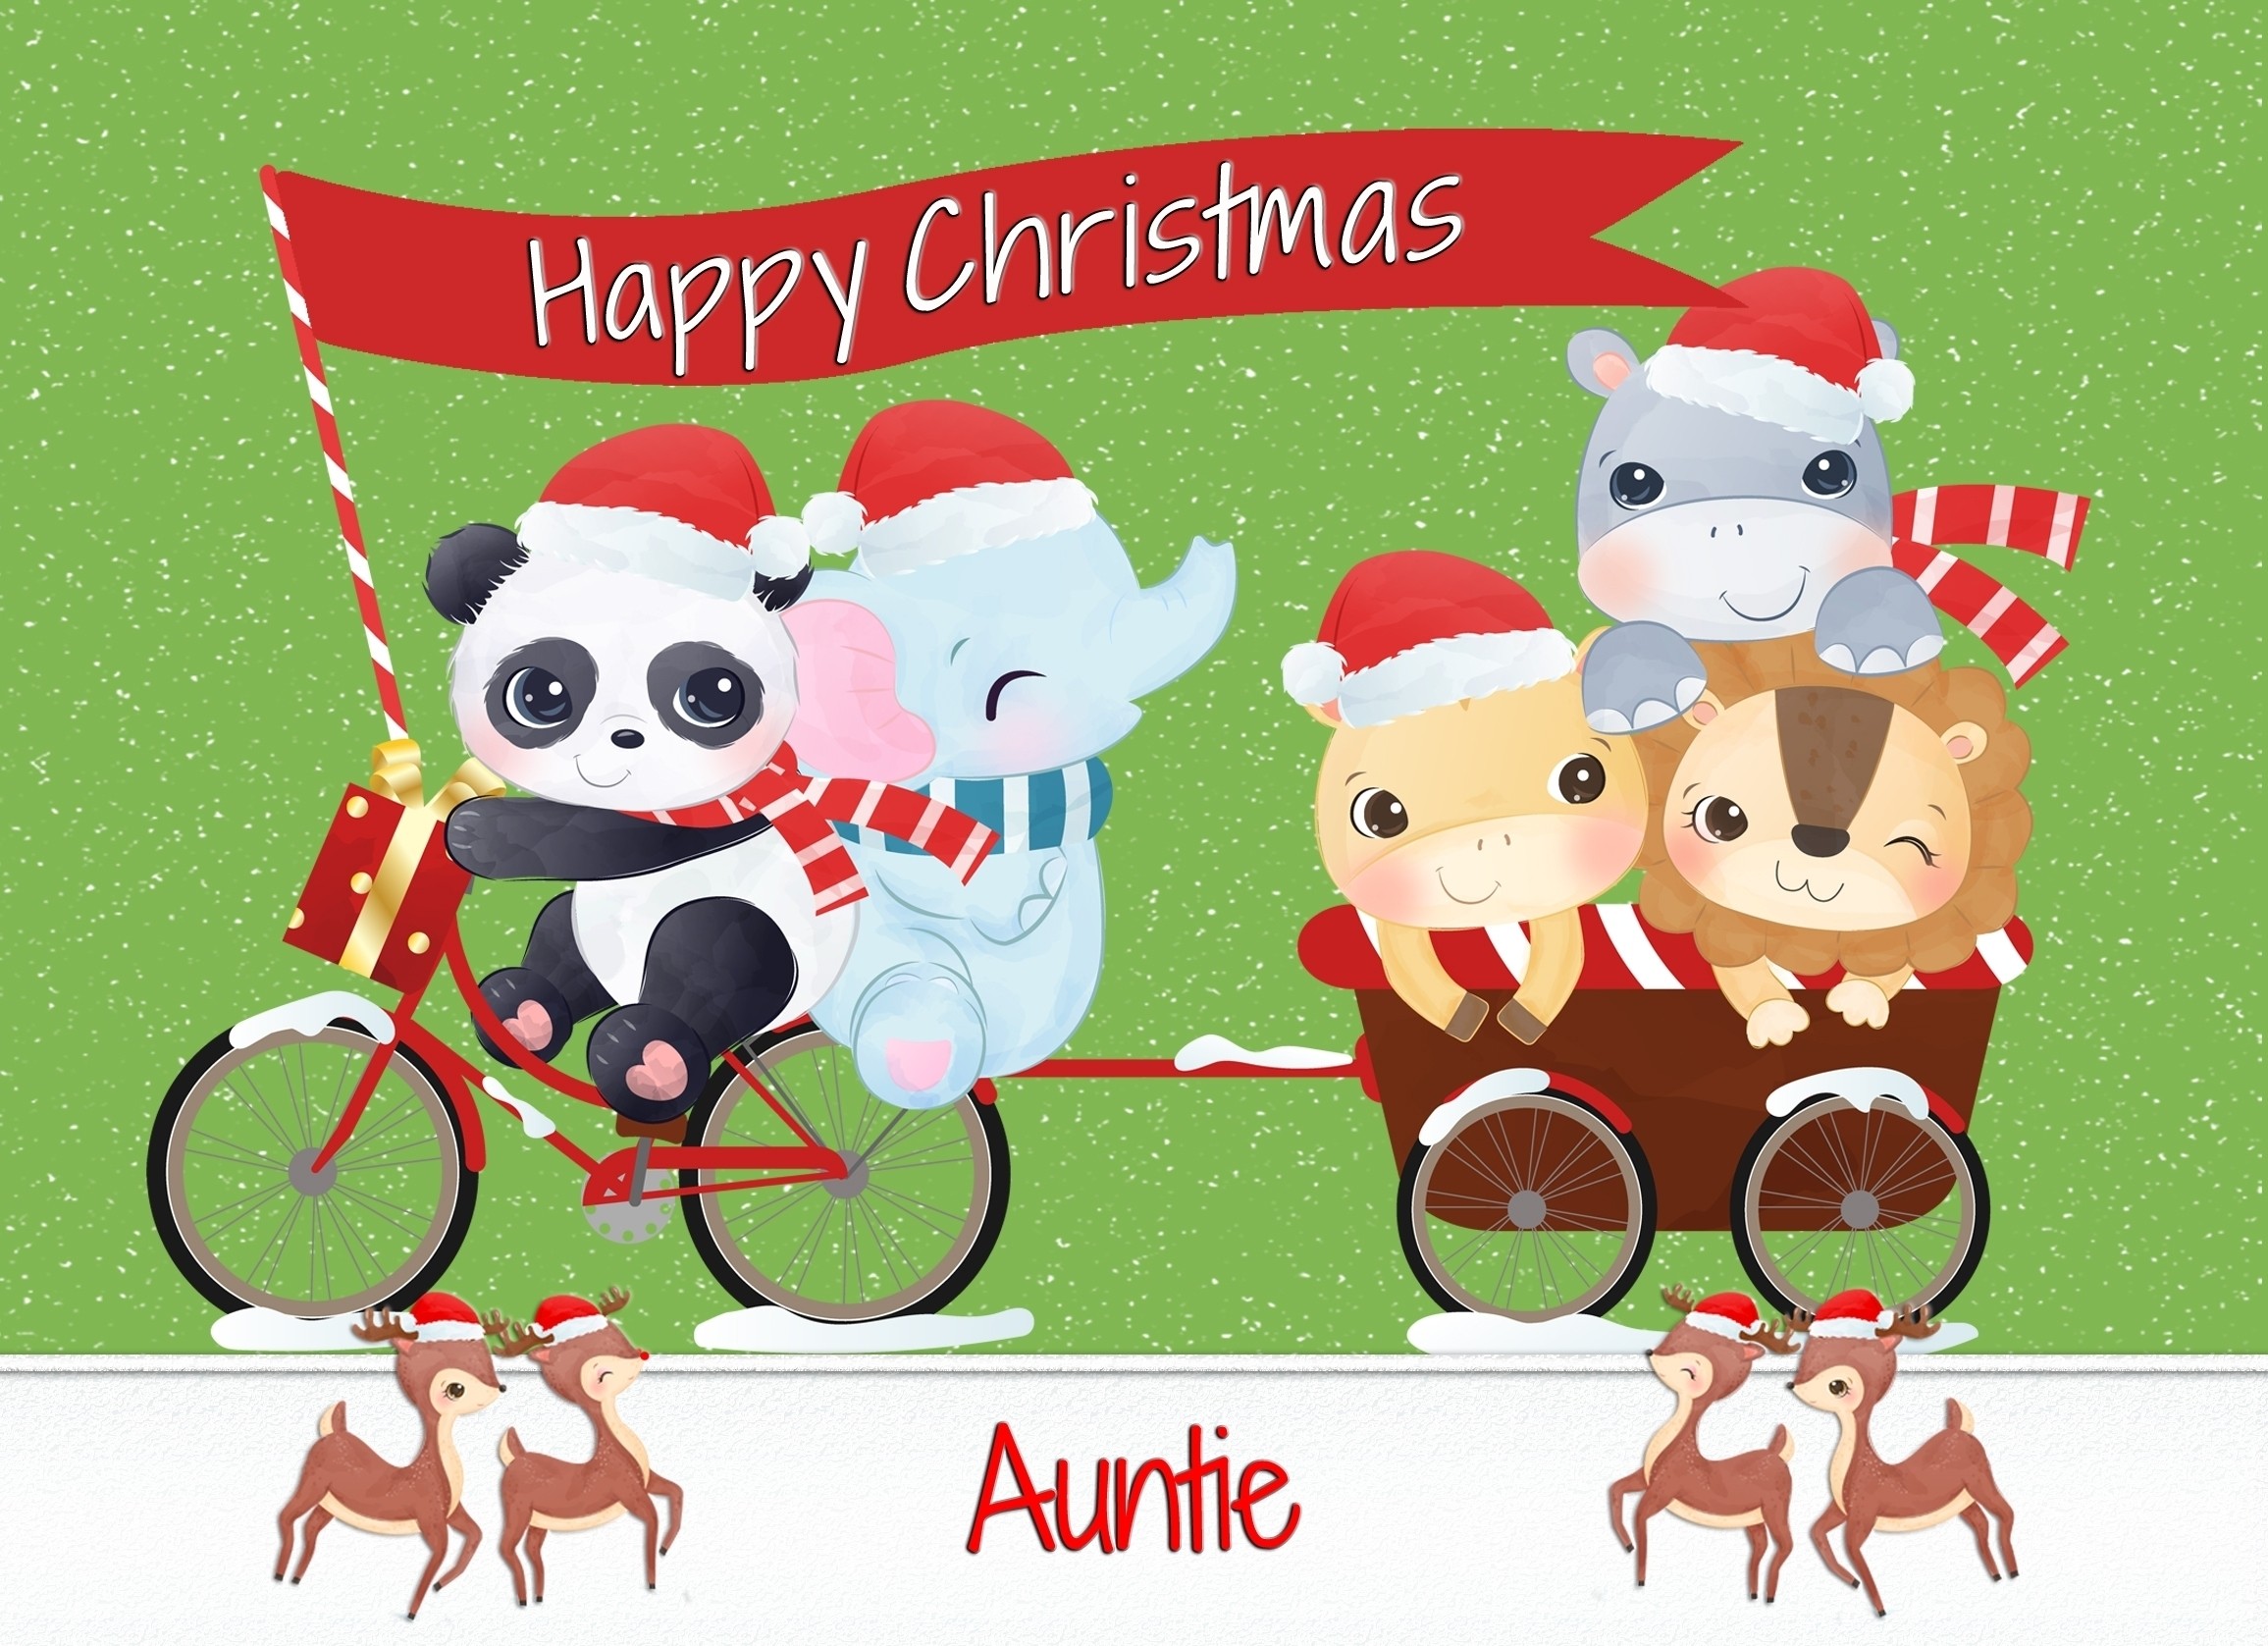 Christmas Card For Auntie (Green Animals)